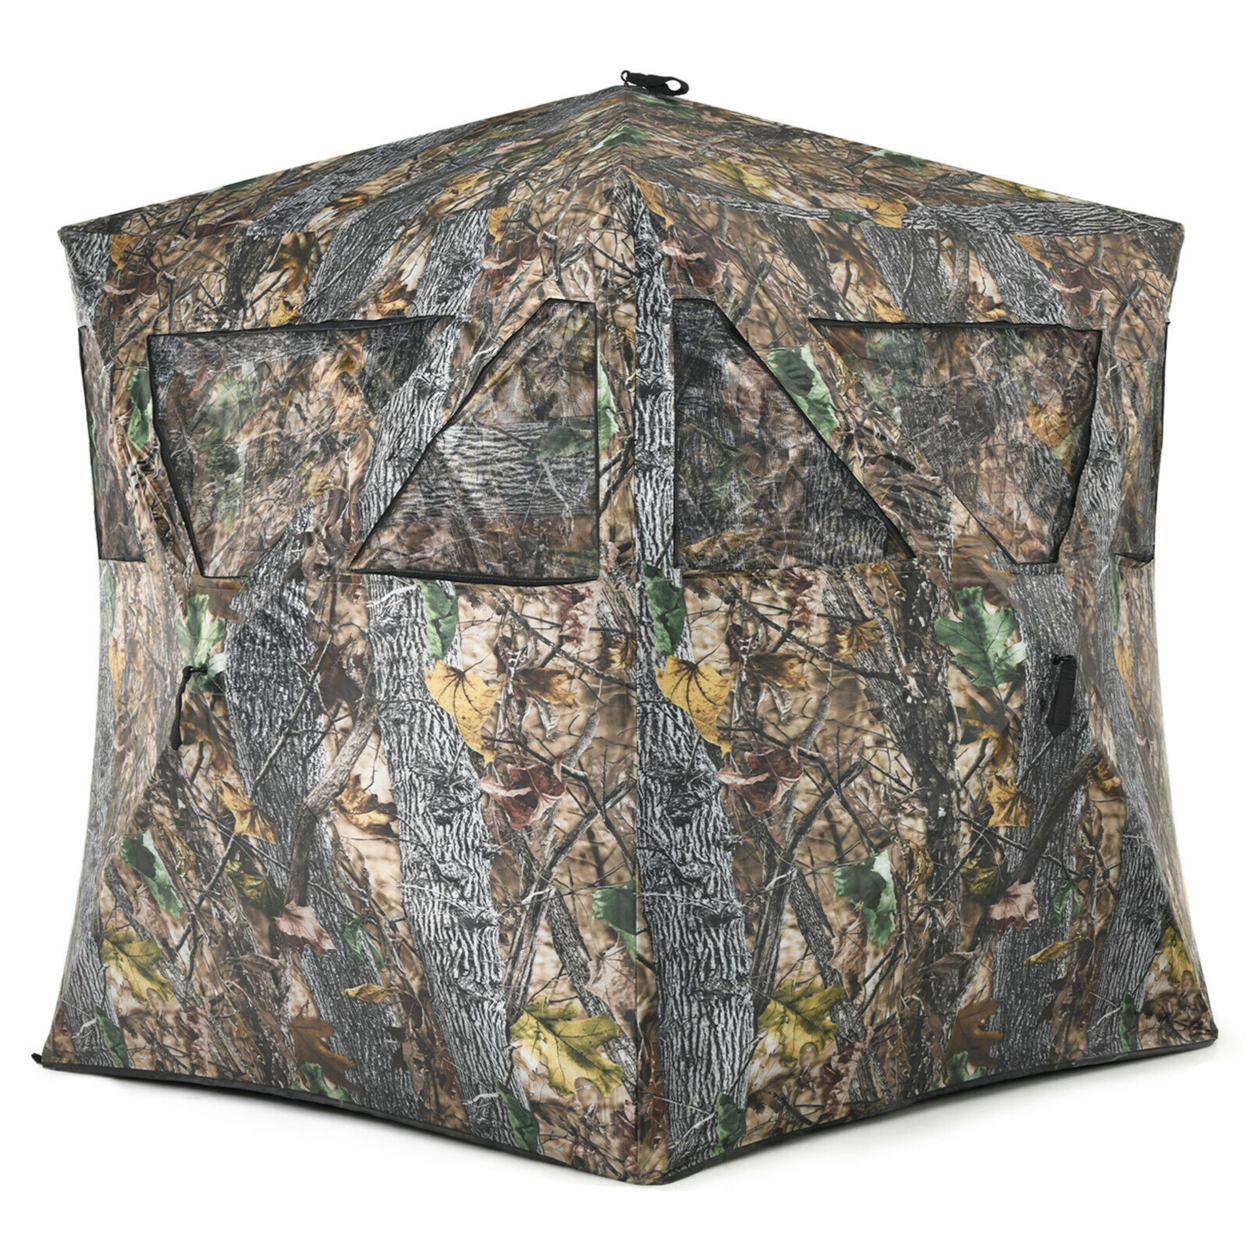 3 Person Portable Hunting Blind Pop-Up Ground Blind W/Tie-downs & Carrying Bag